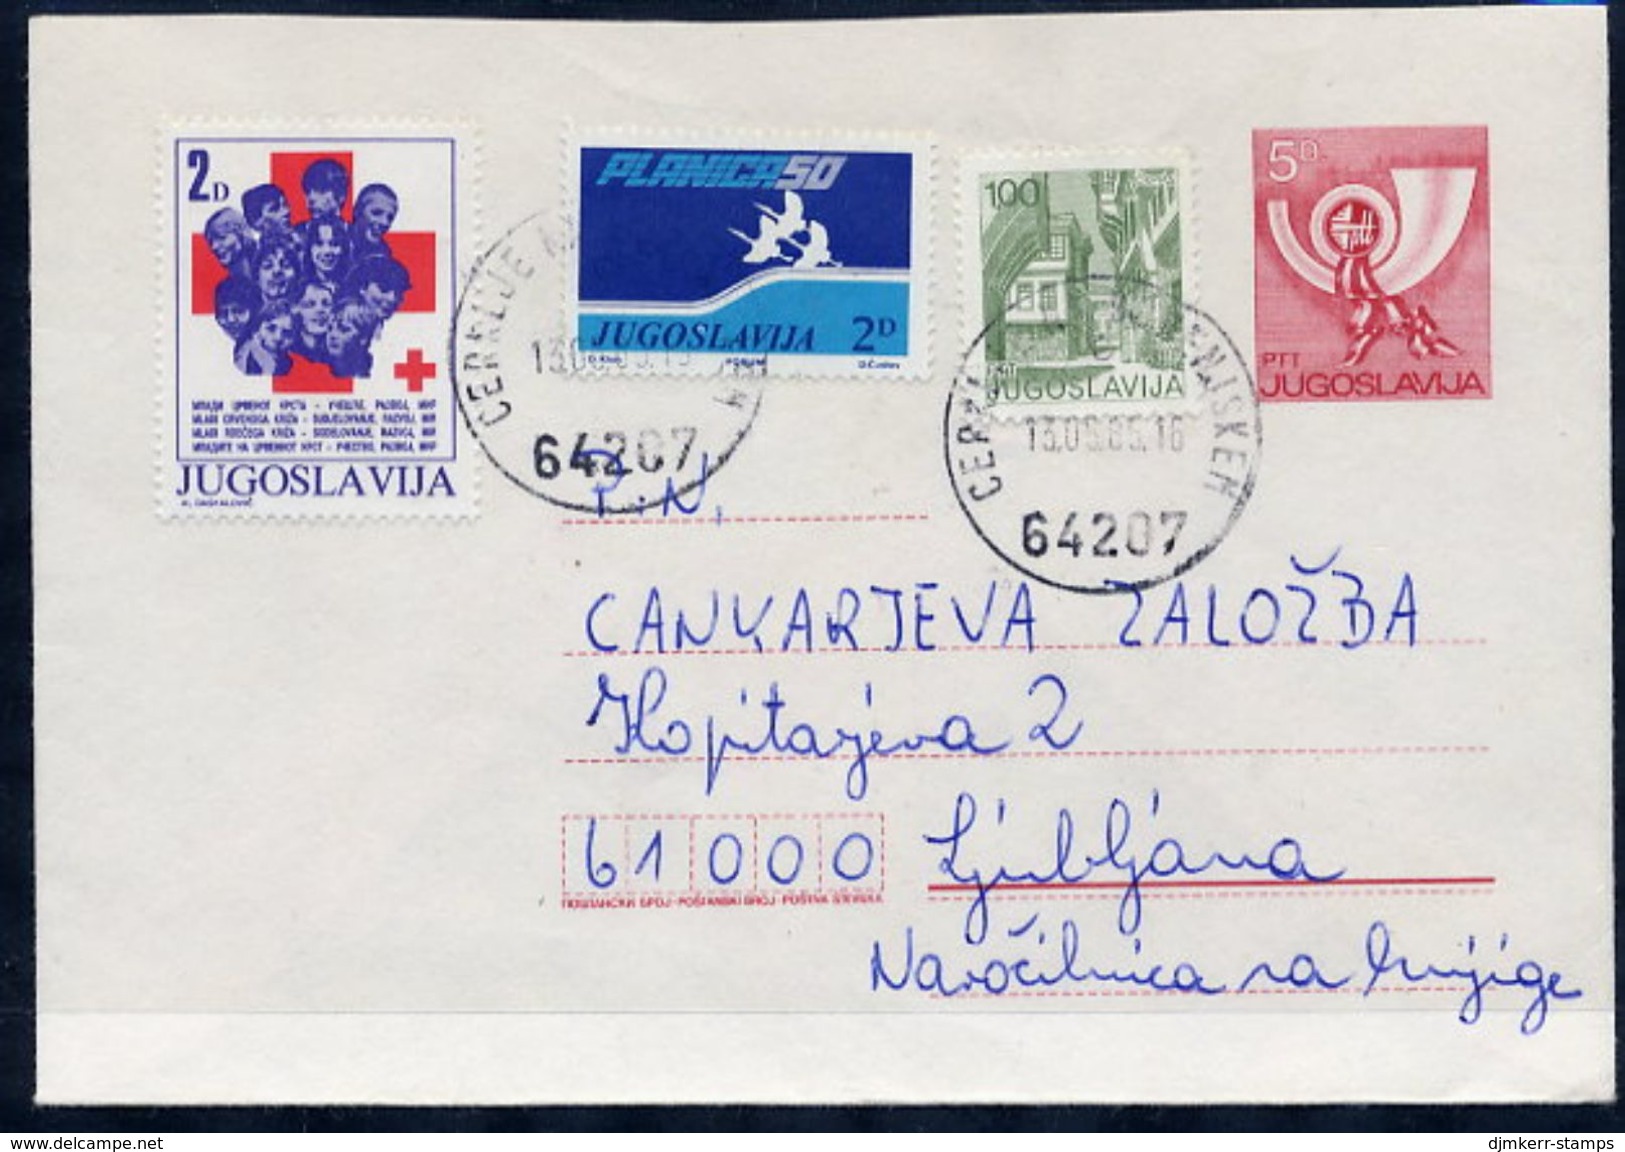 YUGOSLAVIA 1983 Posthorn 5 D.stationery Envelope Used With Additional Franking And Two Tax Stamps  Michel U72 - Entiers Postaux